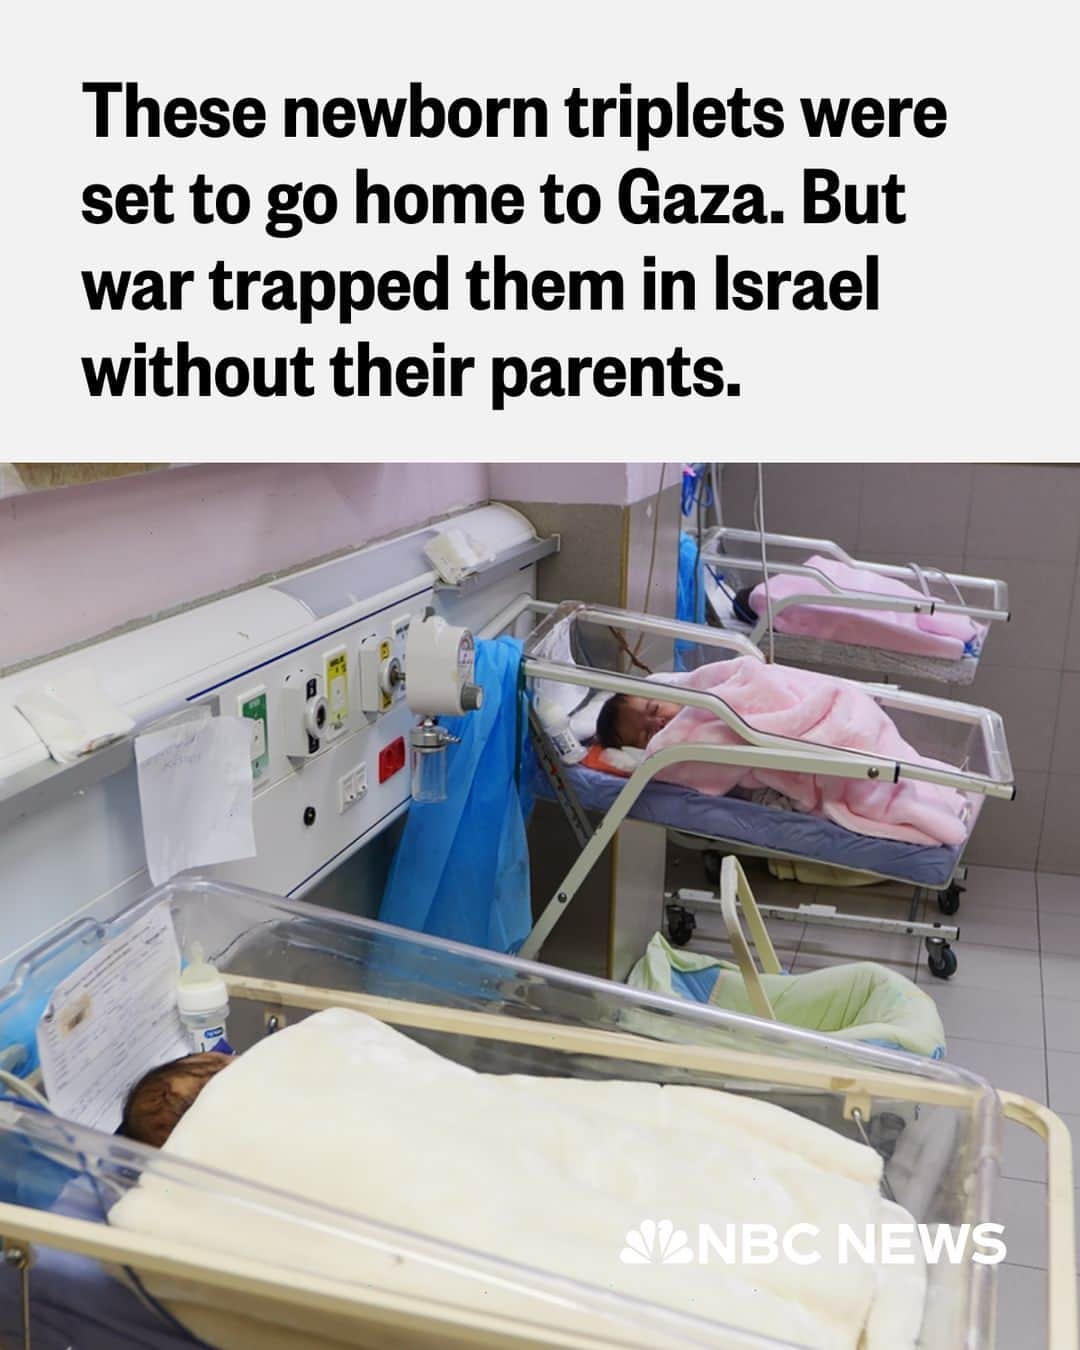 NBC Newsのインスタグラム：「Like most parents of newborns, Hanan and Fathi Beyouq’s faces light up when they see their triplets’ faces. But unlike other parents, Hanan and Fathi can only see their babies through a cell phone screen.   “The war separated us,” Hanan said, tears pouring down her face. “As a mother, I wish I could hug my girls.”  But although they miss their babies dearly, the Beyouqs don’t think there is any way to reunite until there is a new truce or the war ends.   “It is more safe there,” Hanan said, when asked if there is a chance she could take the babies back to Gaza. “Here the situation is very bad. We can’t provide them with milk or diapers or even food for ourselves.”  Read more at the link in bio.」